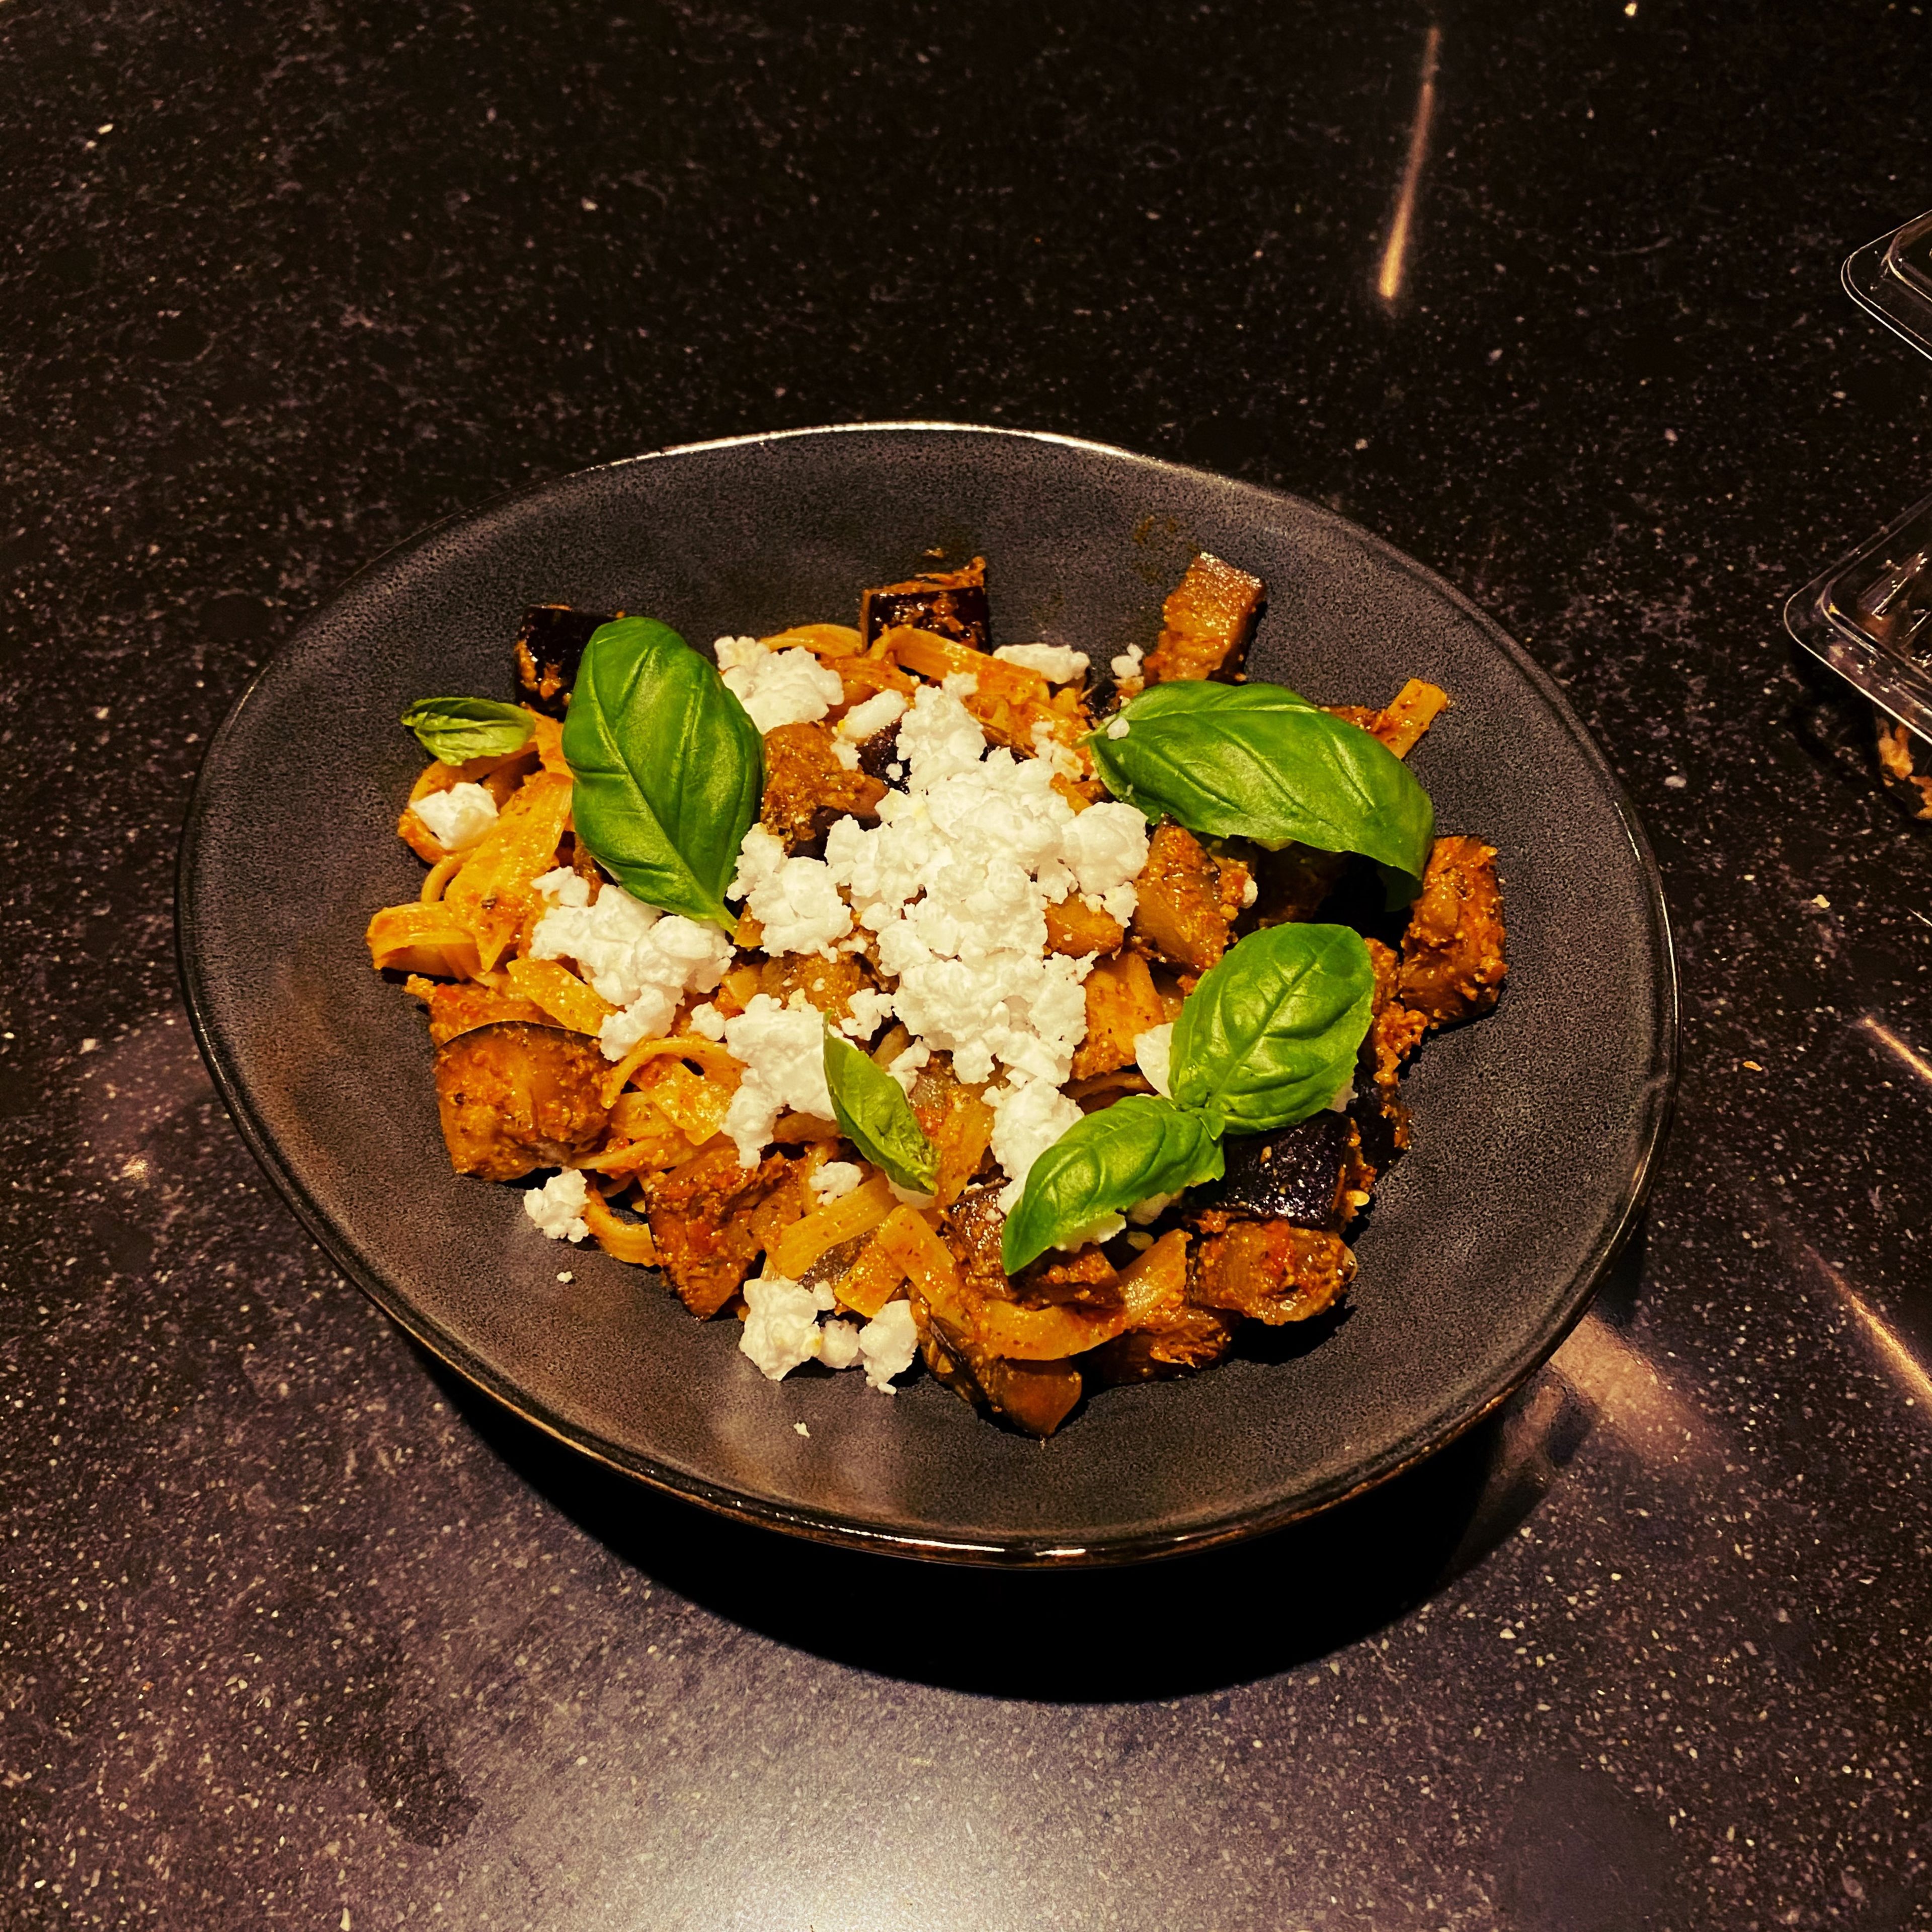 Tagliatelle with grilled eggplant and feta